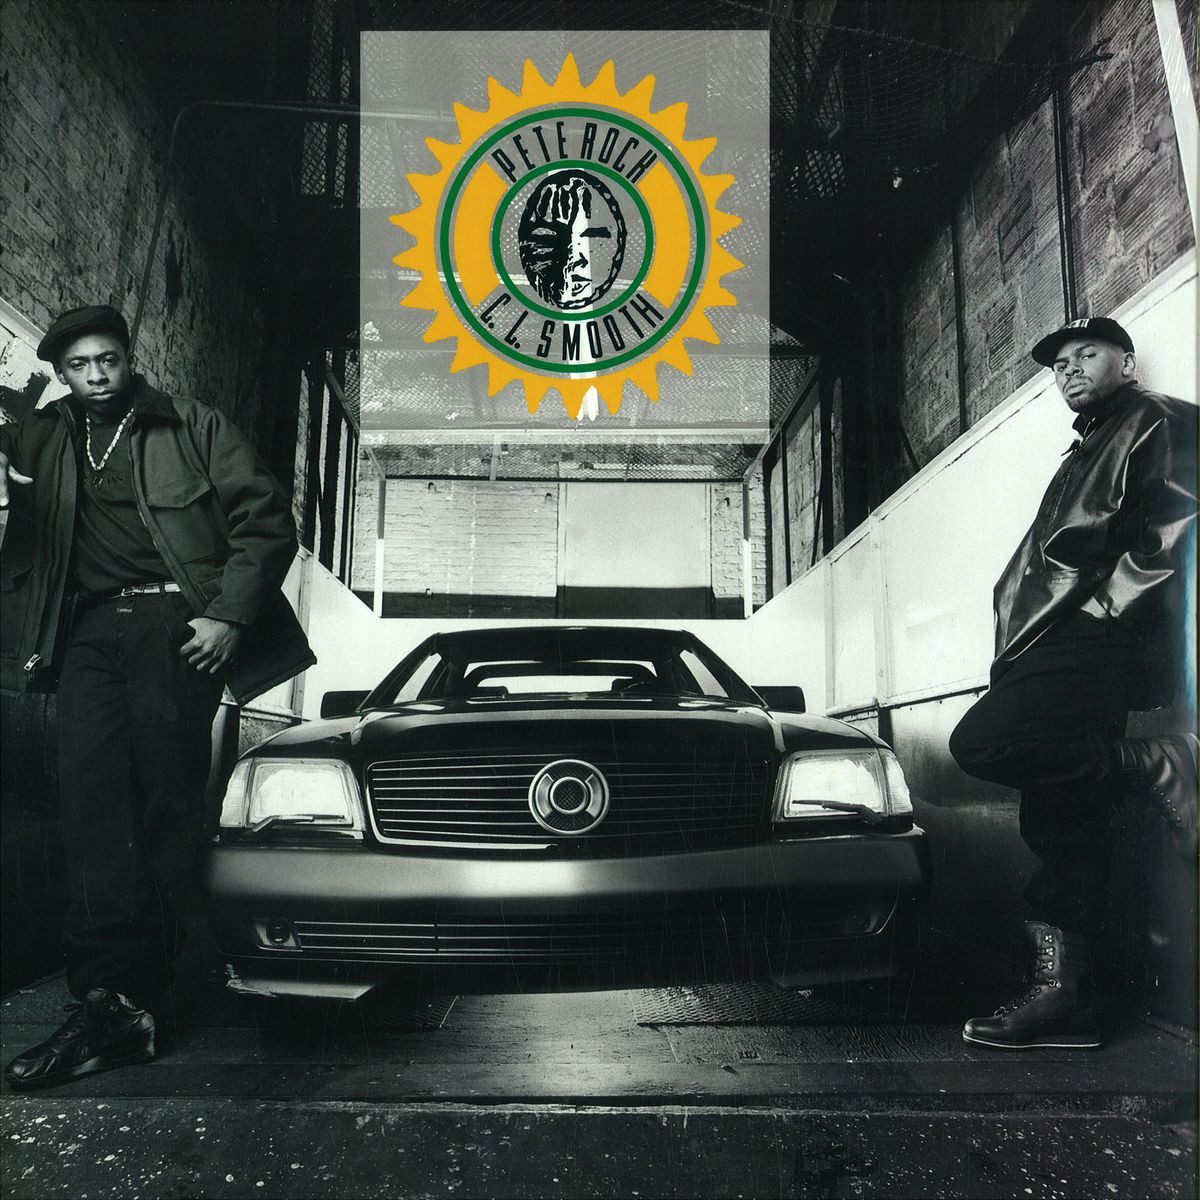 Mecca and the Soul Brother by Pete Rock & CL Smooth